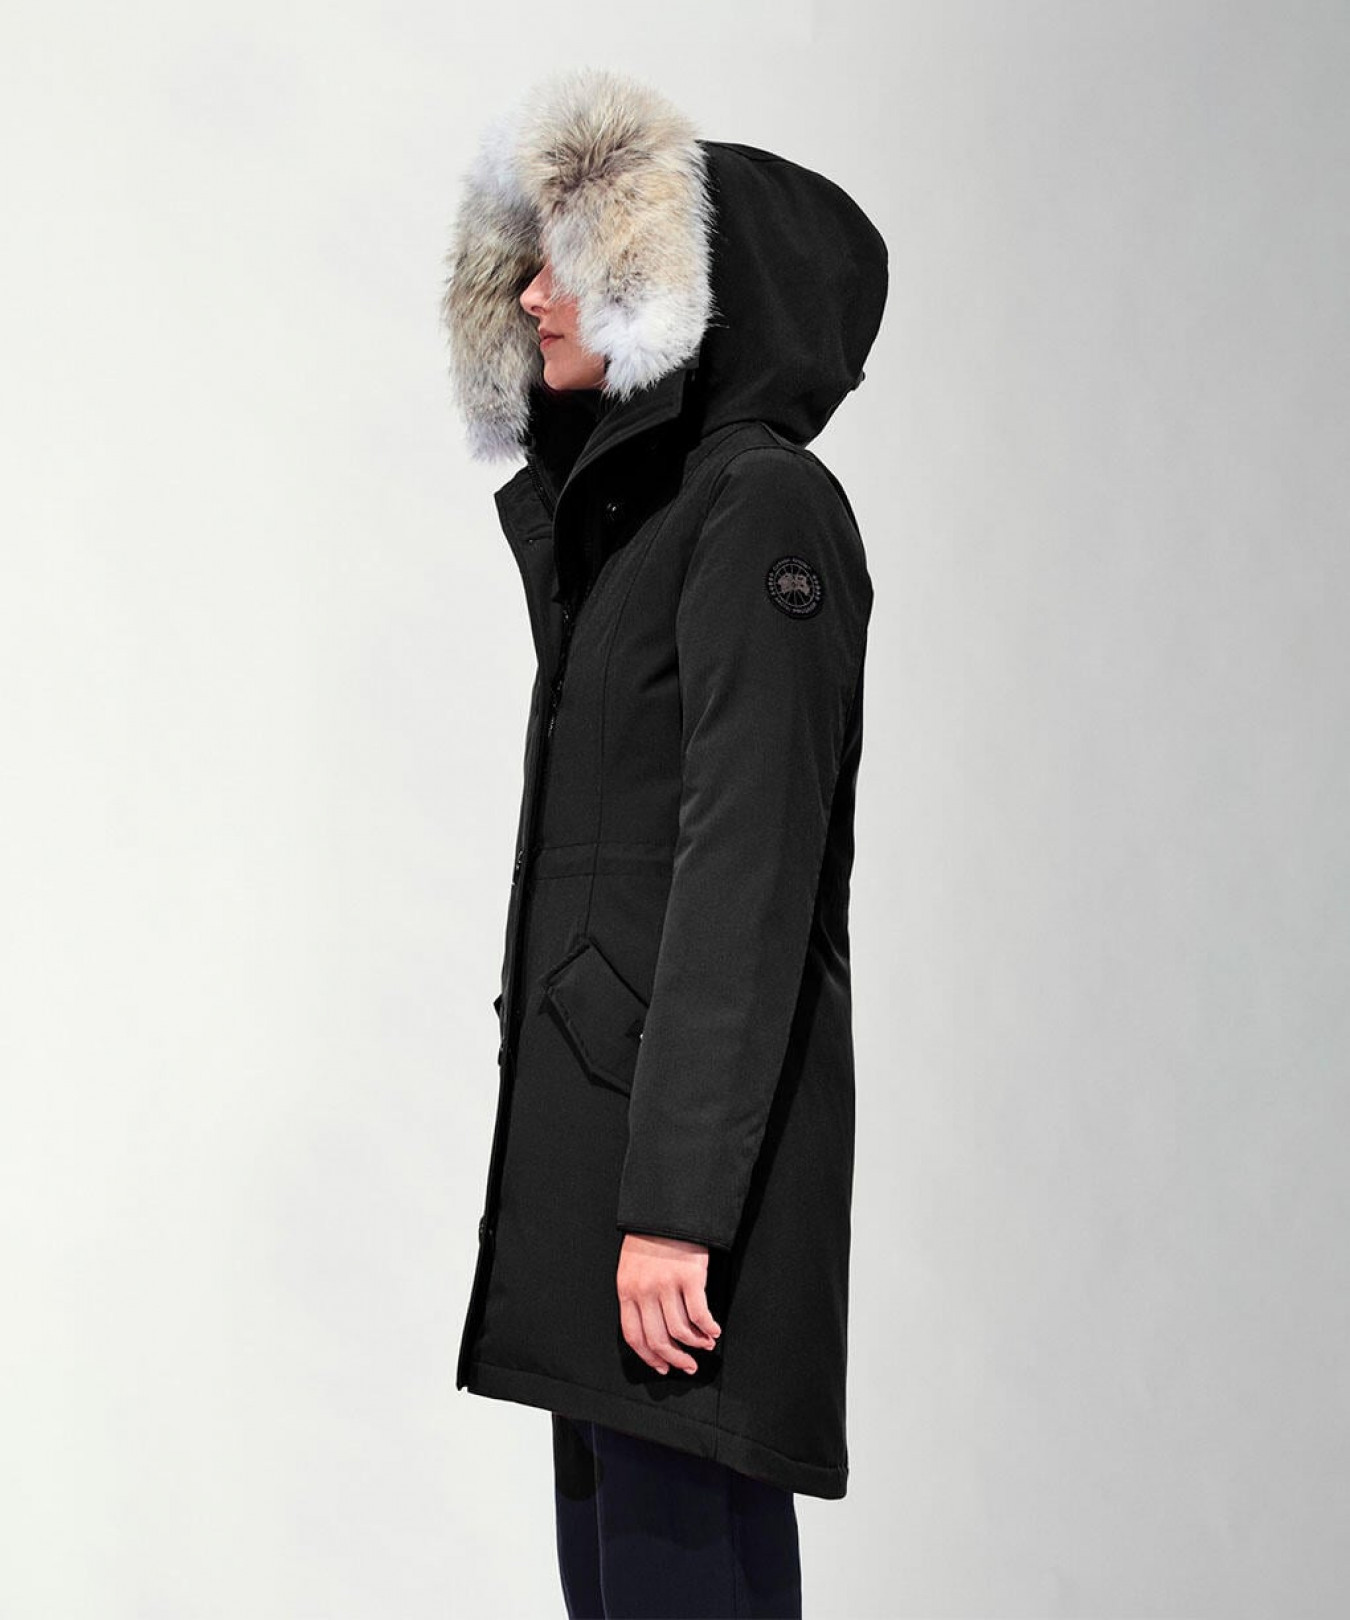 ROSSCLAIR PARKA BLACK LABEL 13万6,400円（tax in）STYLE# 2580LB(9月11日発売)